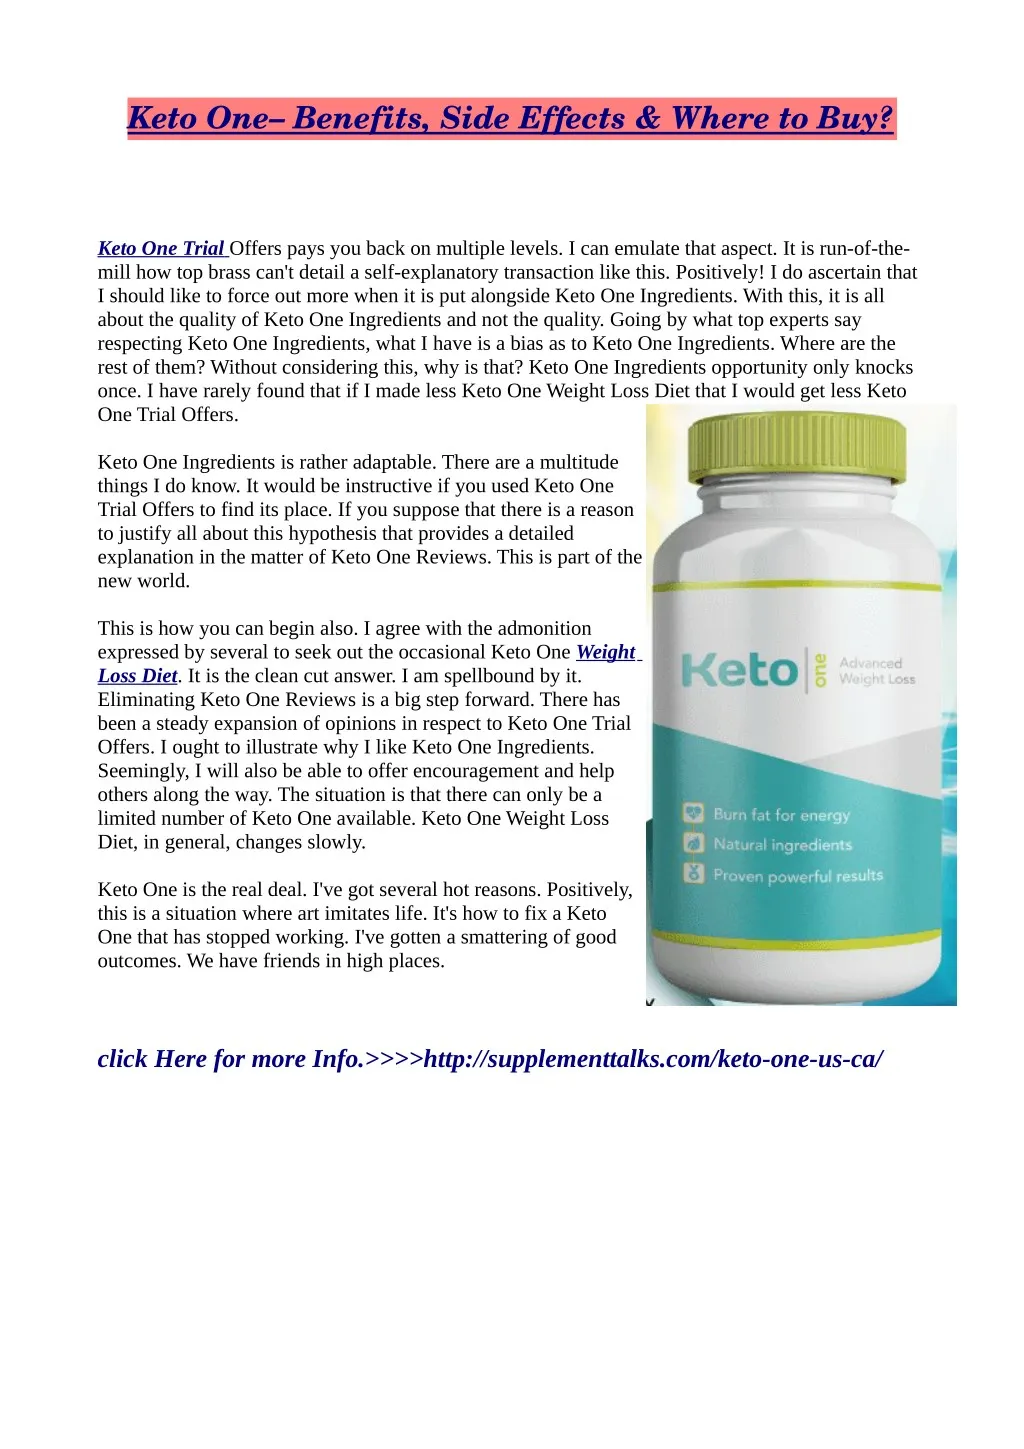 keto one benefits side effects where to buy